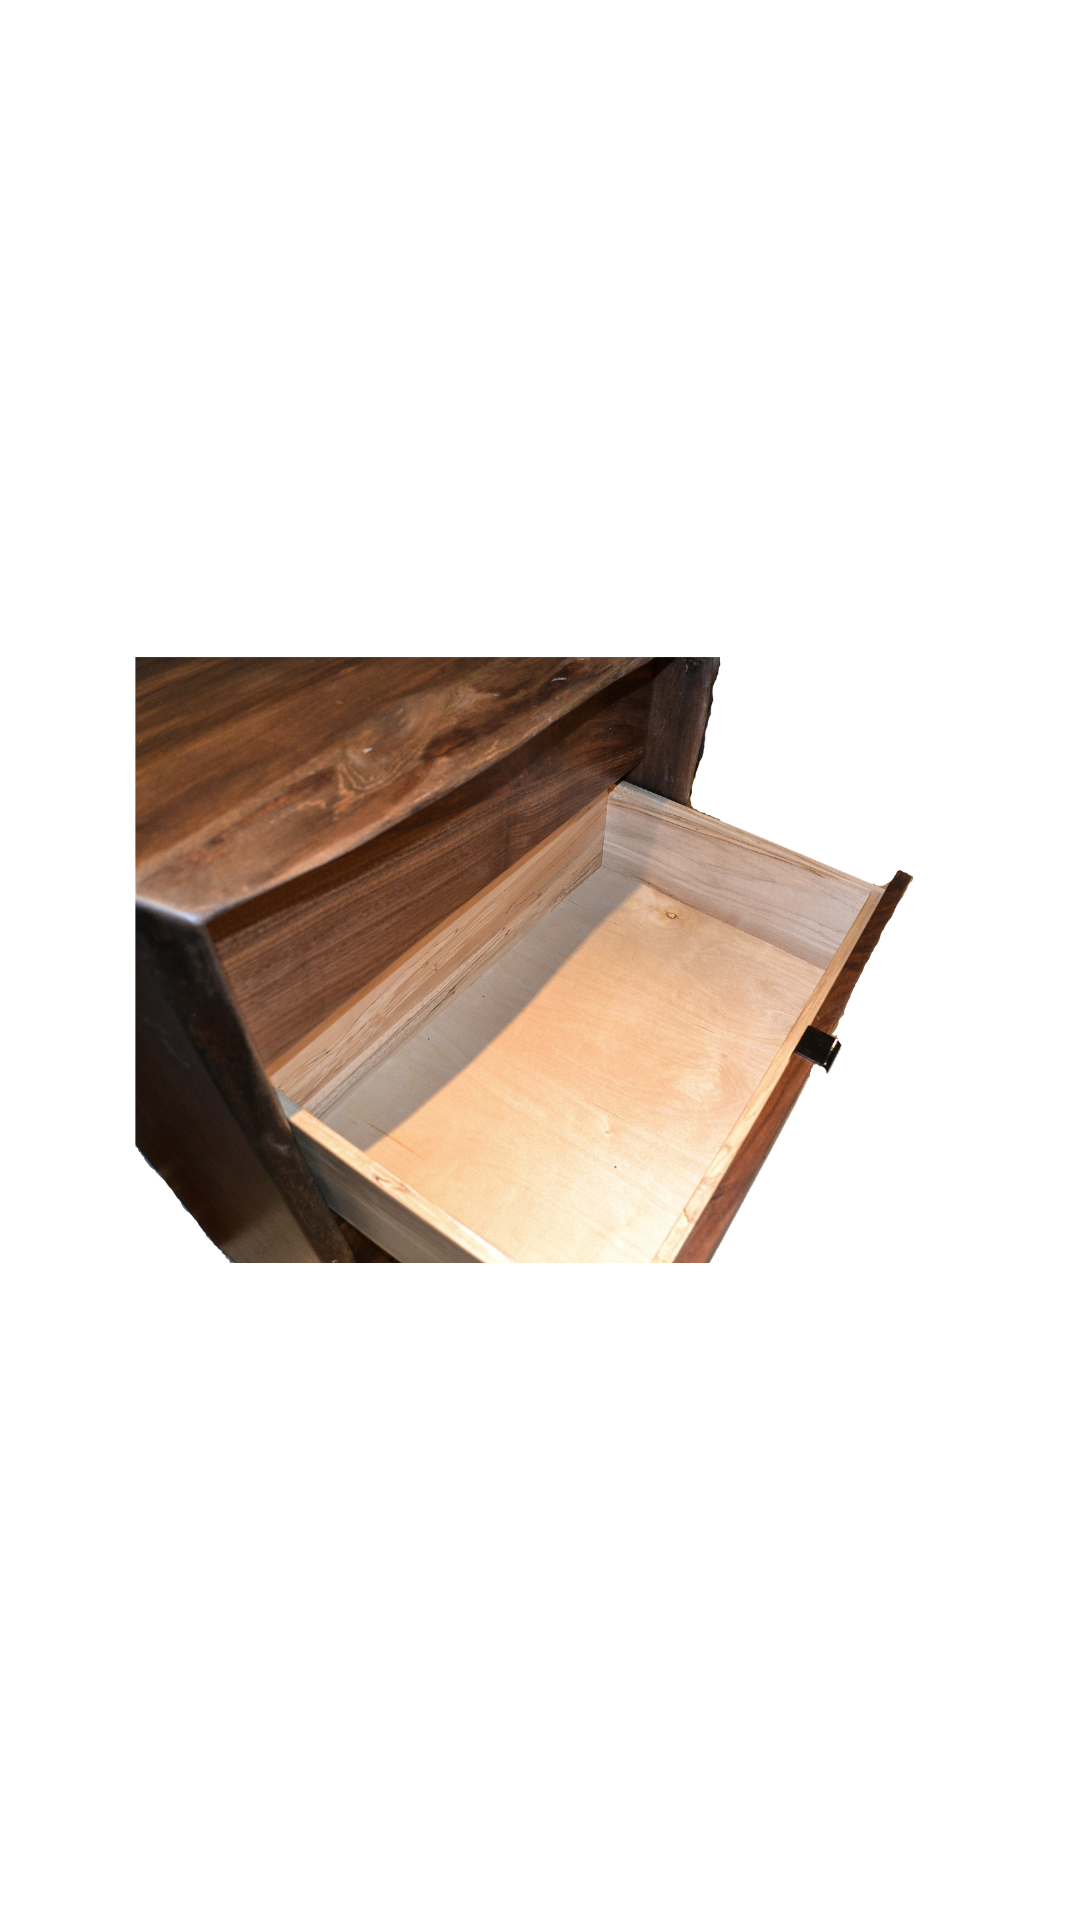 Chest of Drawers - Canadian Walnut -  Live Edge Solid Wood: Custom Available